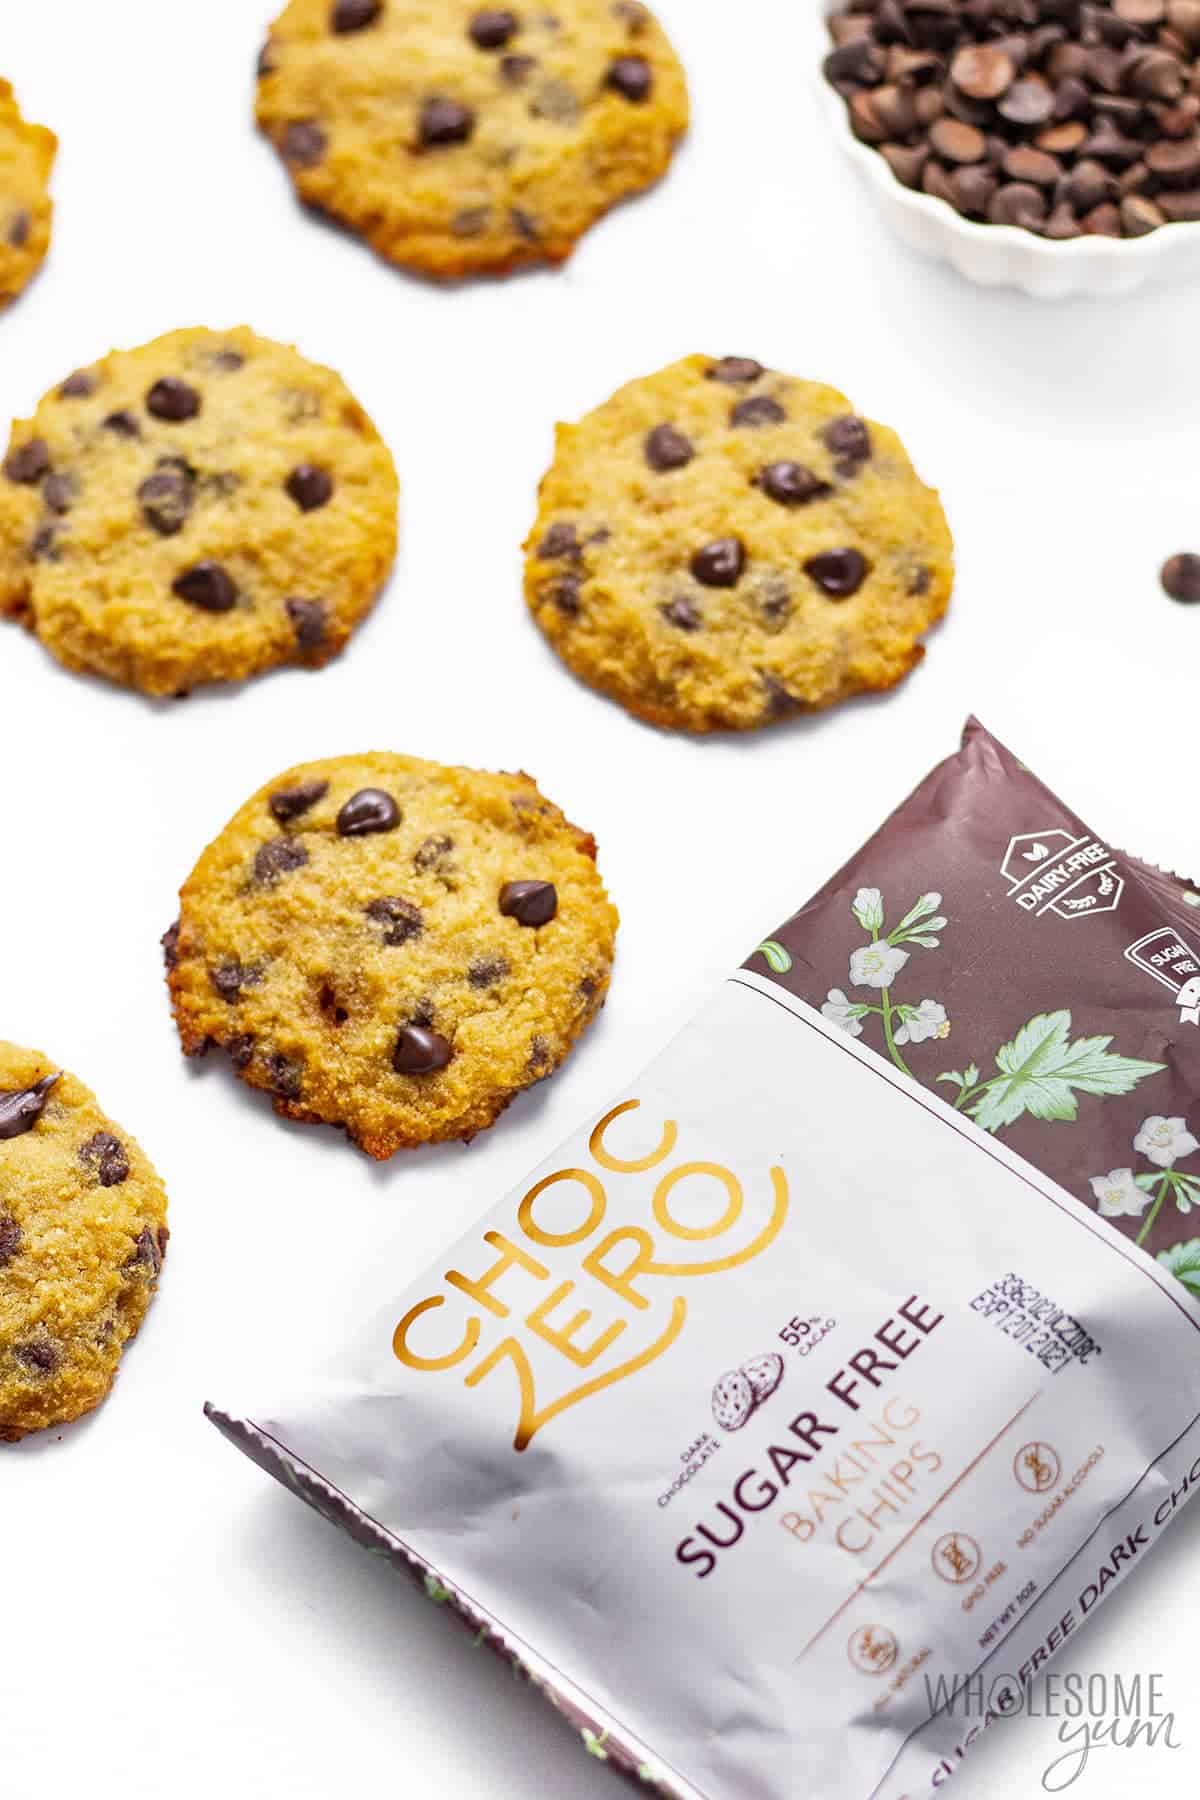 Coconut flour chocolate chip cookies with bag of ChocZero chocolate chips